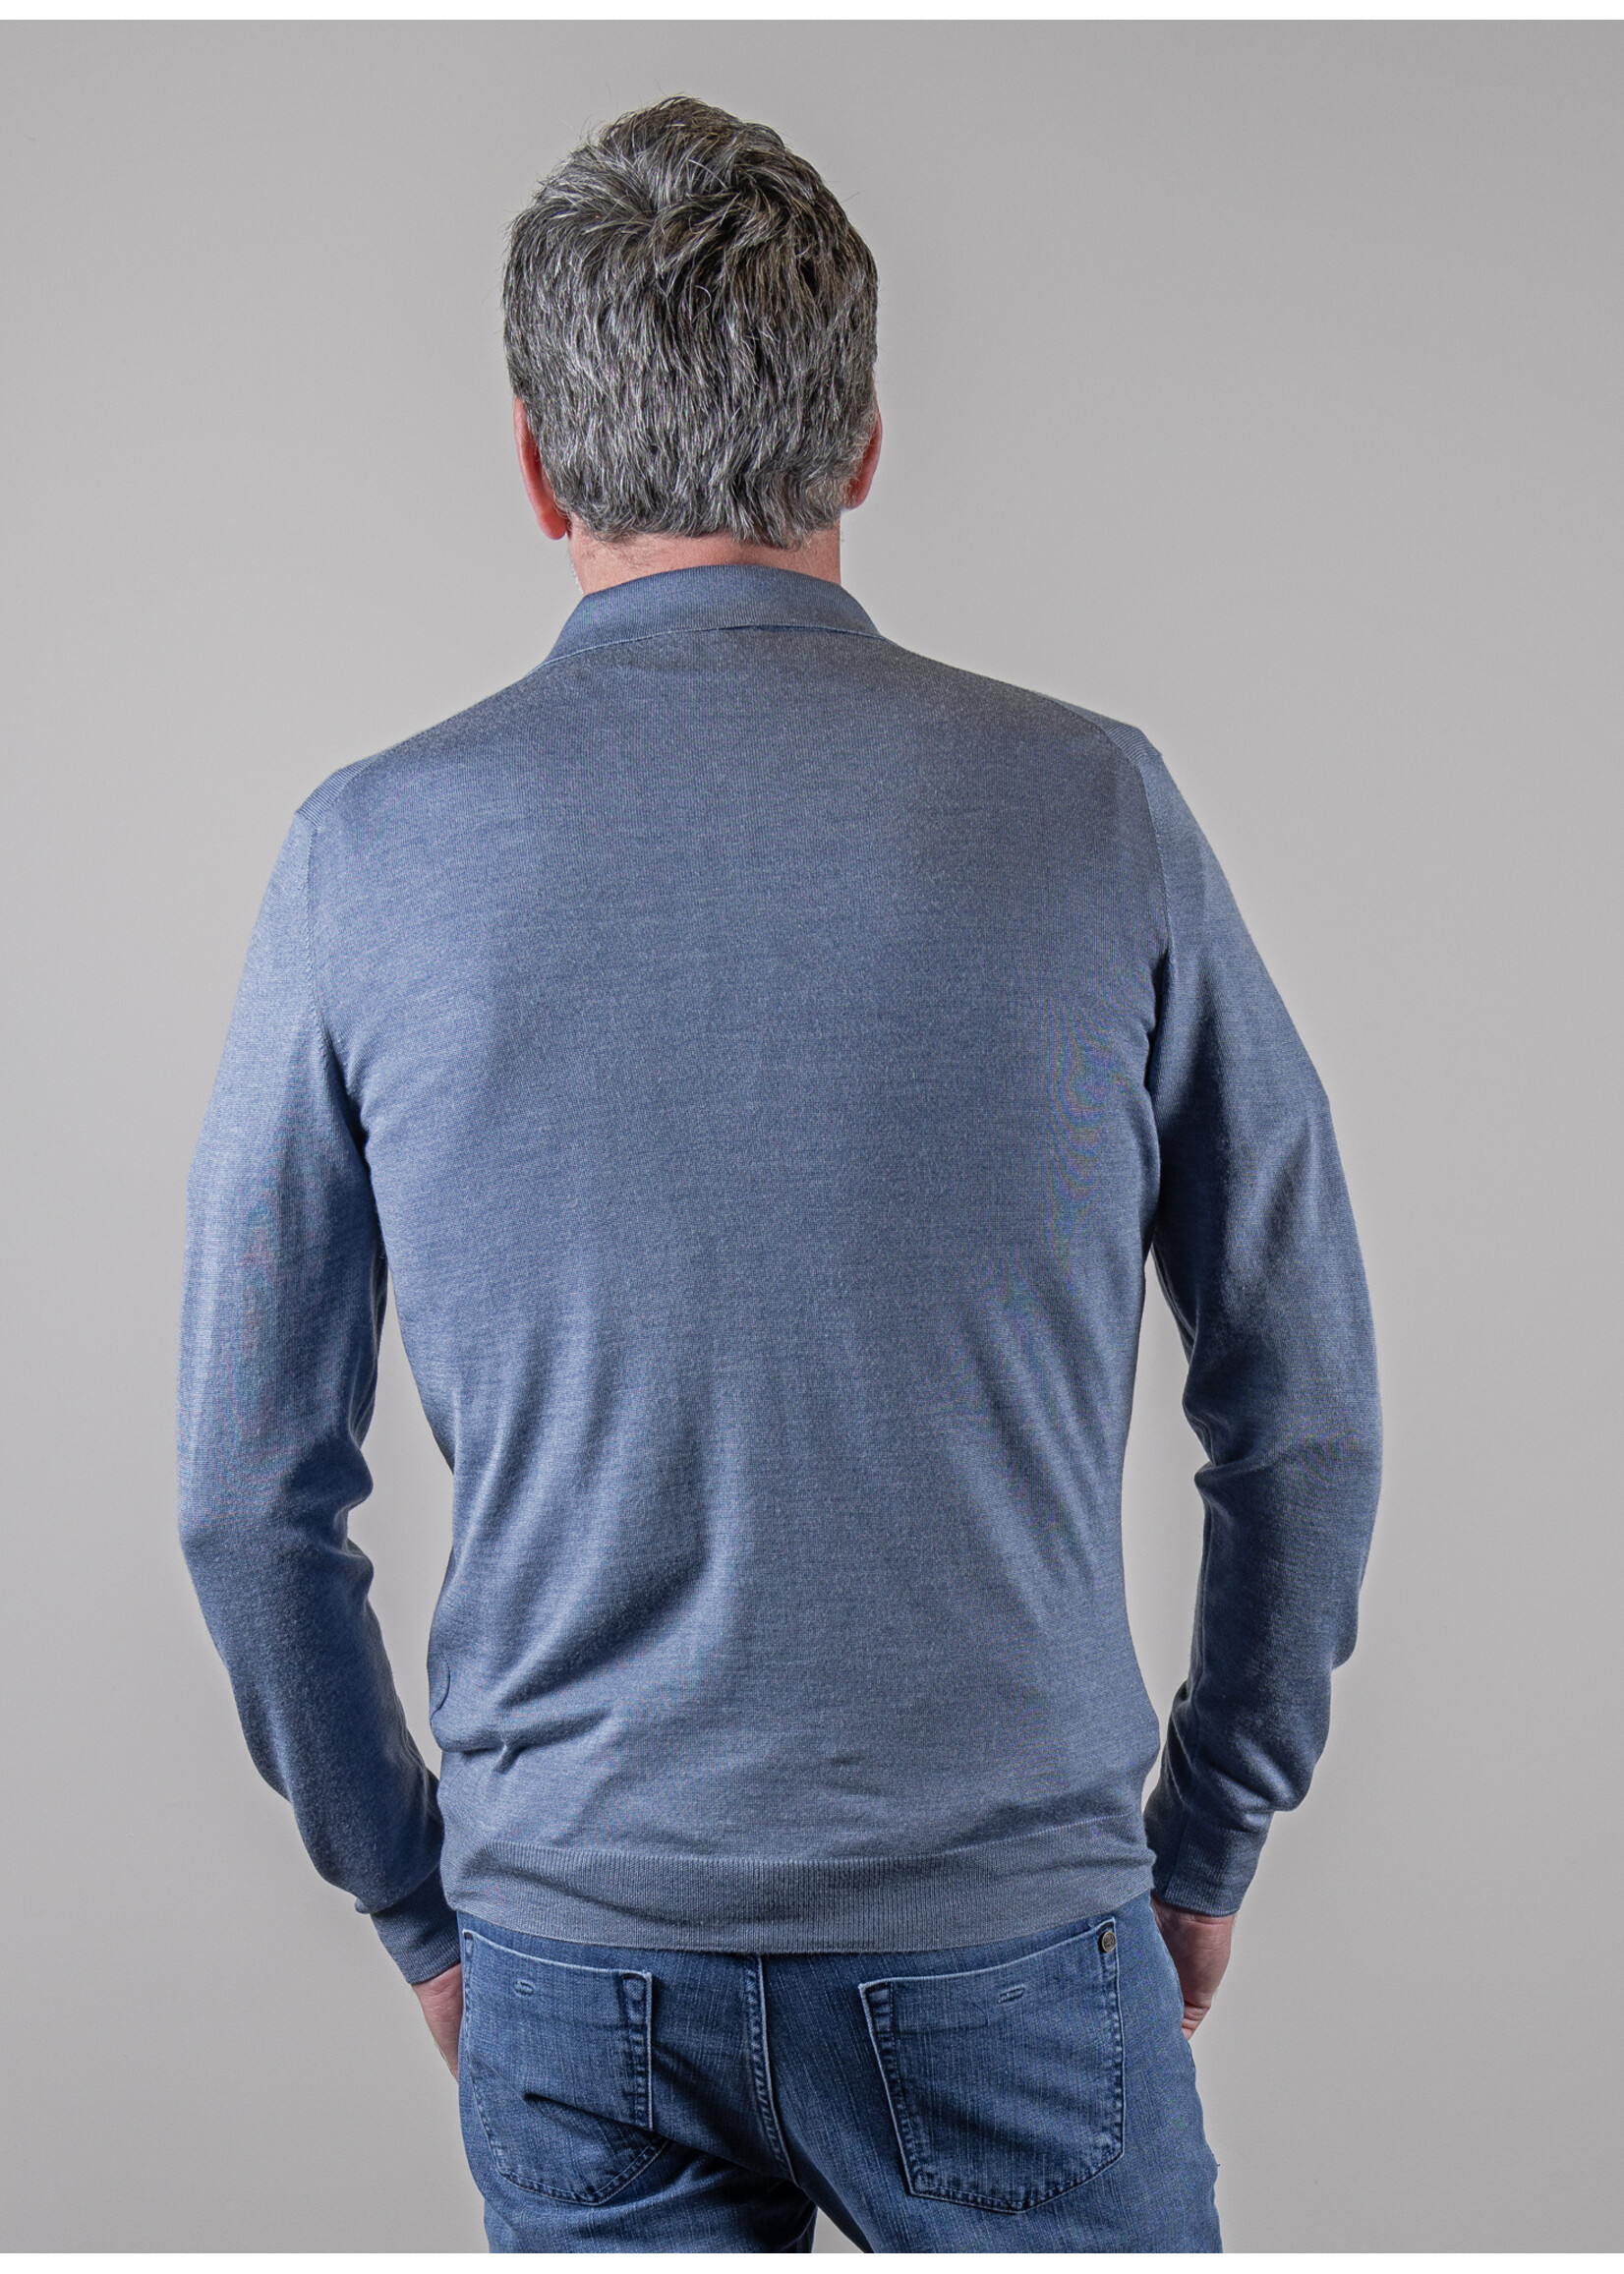 Ridiculous Classic Knitpolo Long Sleeve Storm Blue